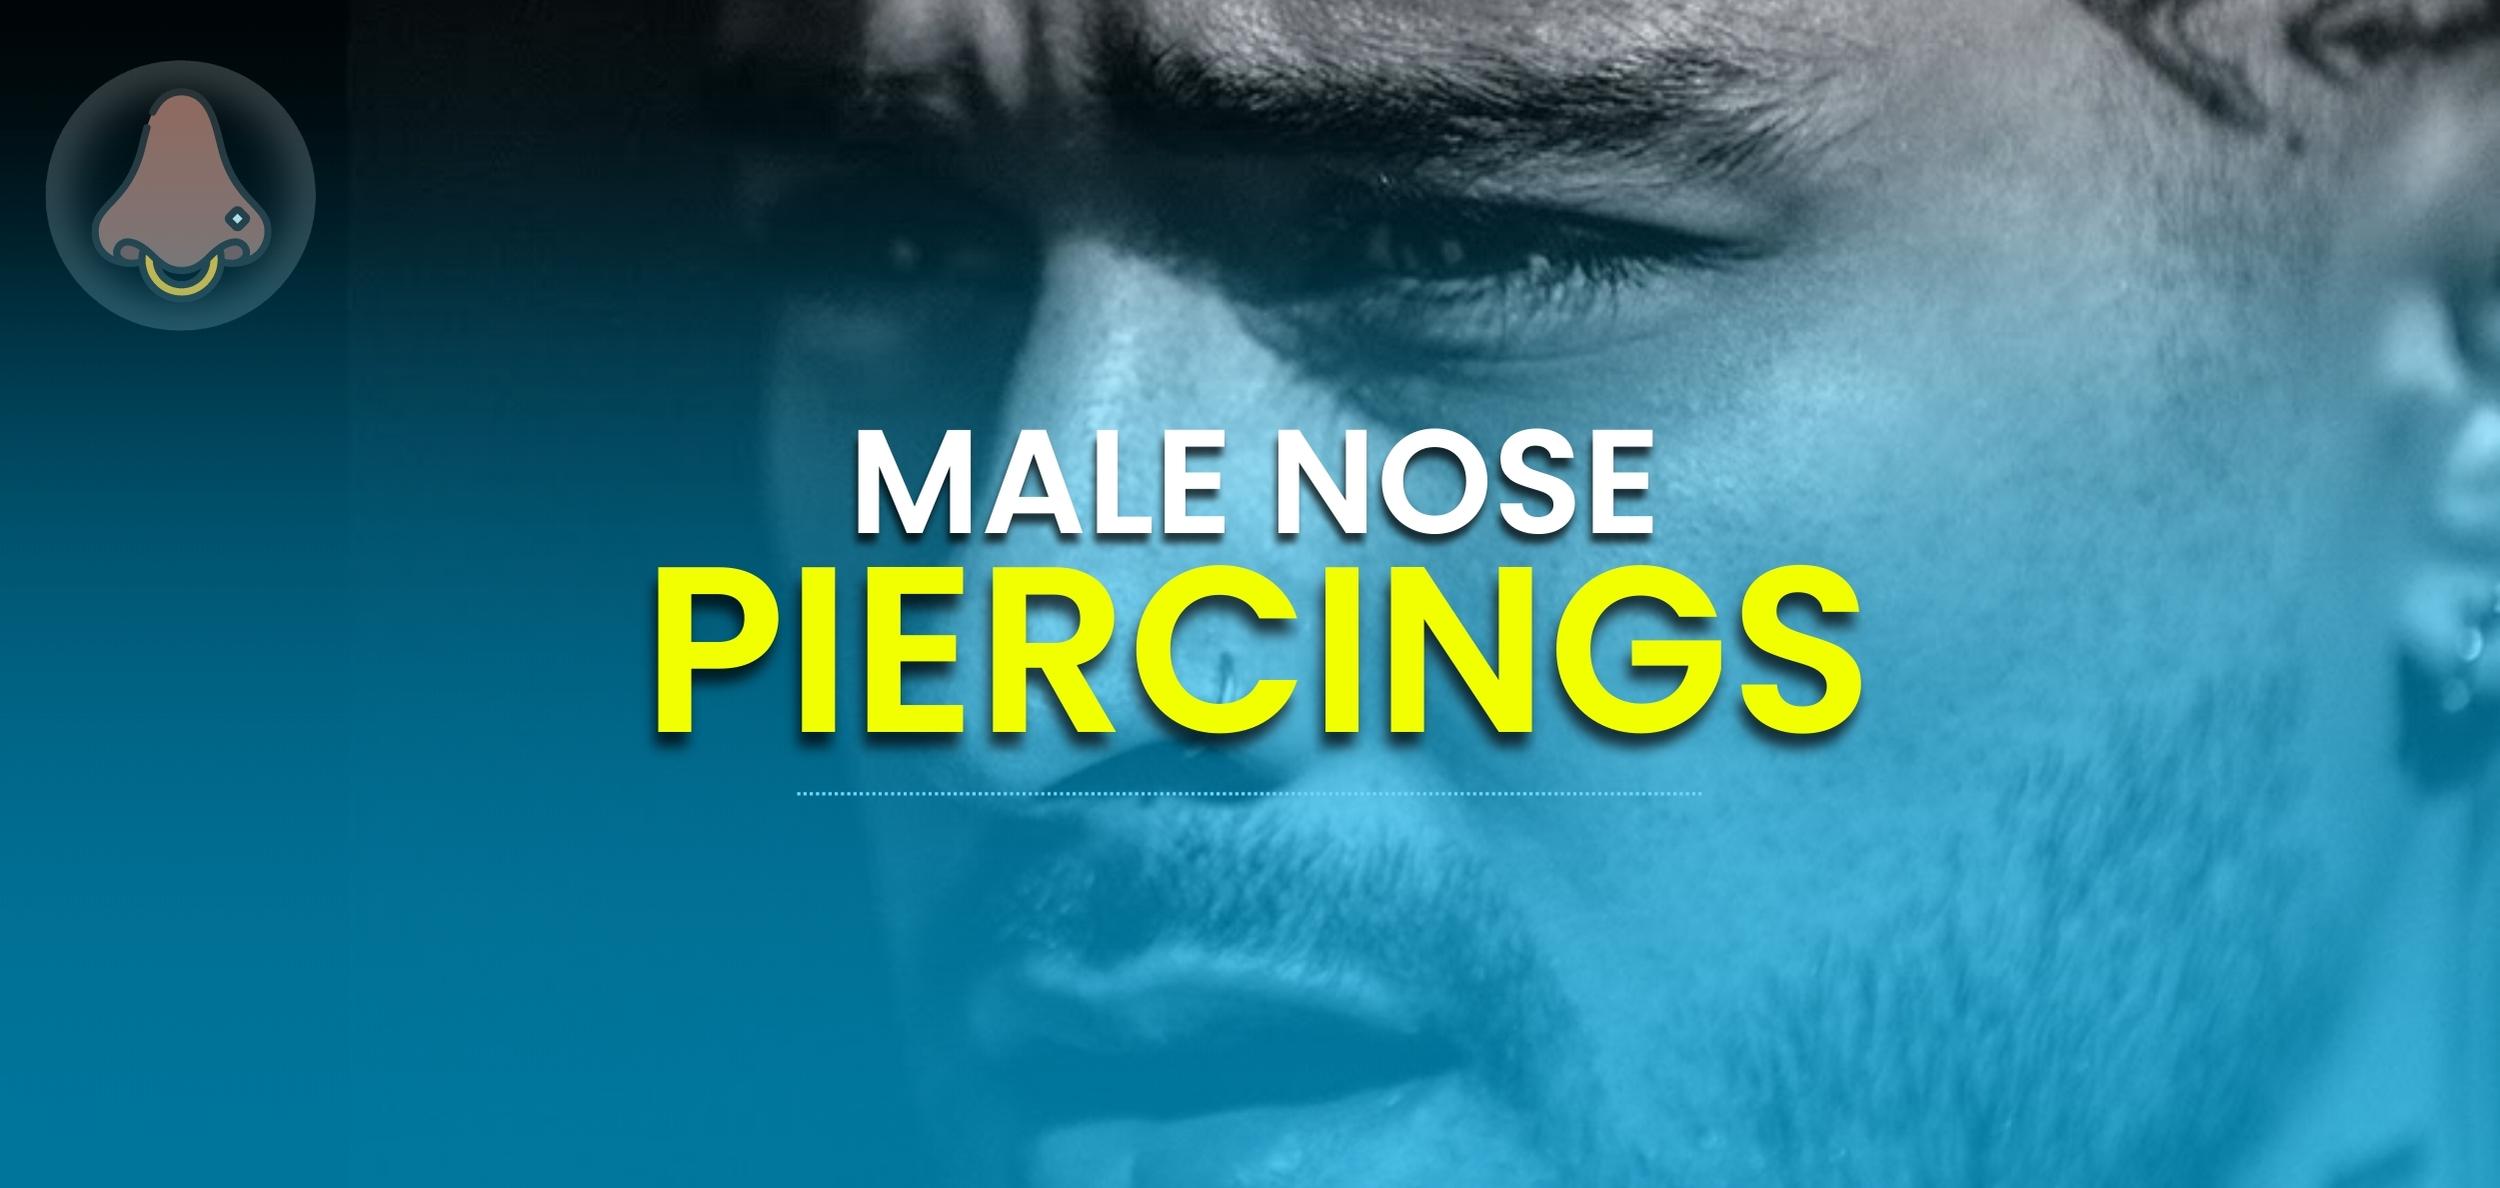 Guide To Nose Piercings For Guys Tips, Celebrities, And More